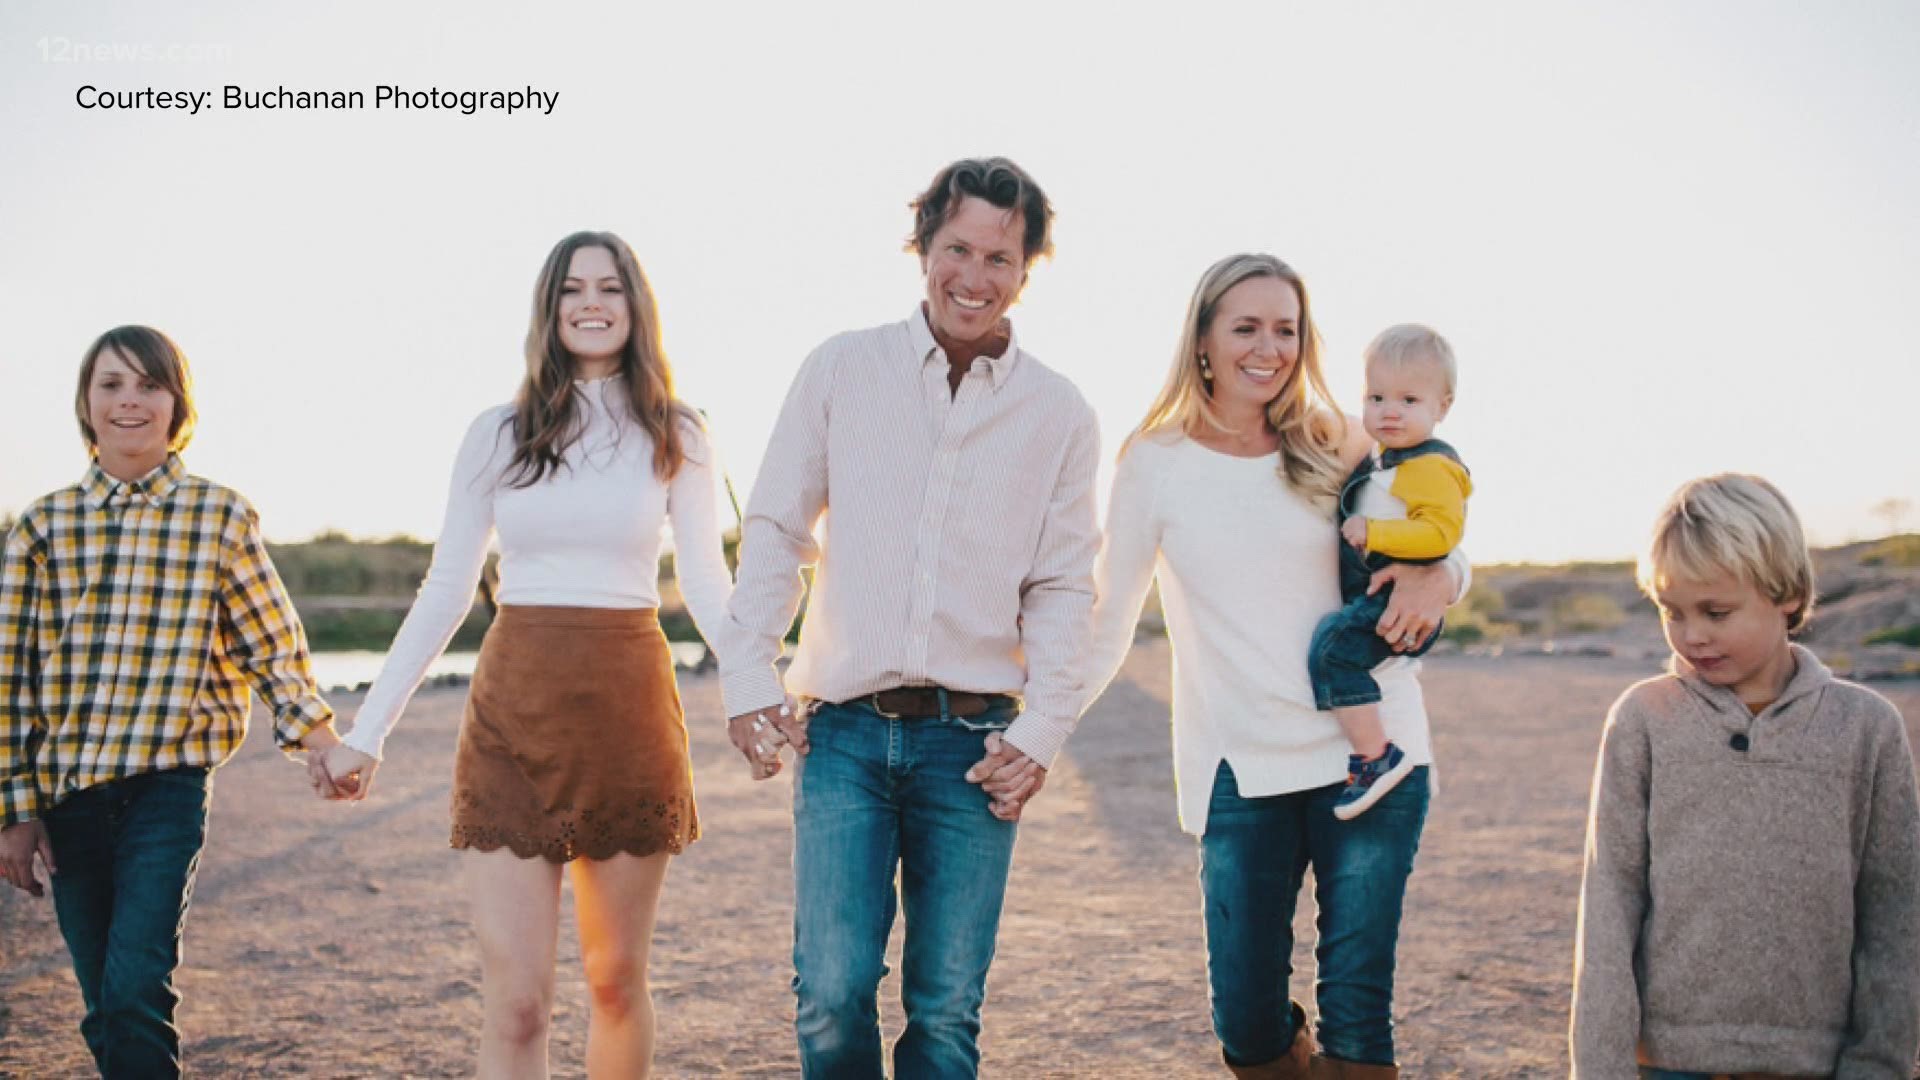 Not long ago the Mladick family was seen smiling in photos, but now they’re dealing with an unimaginable loss.